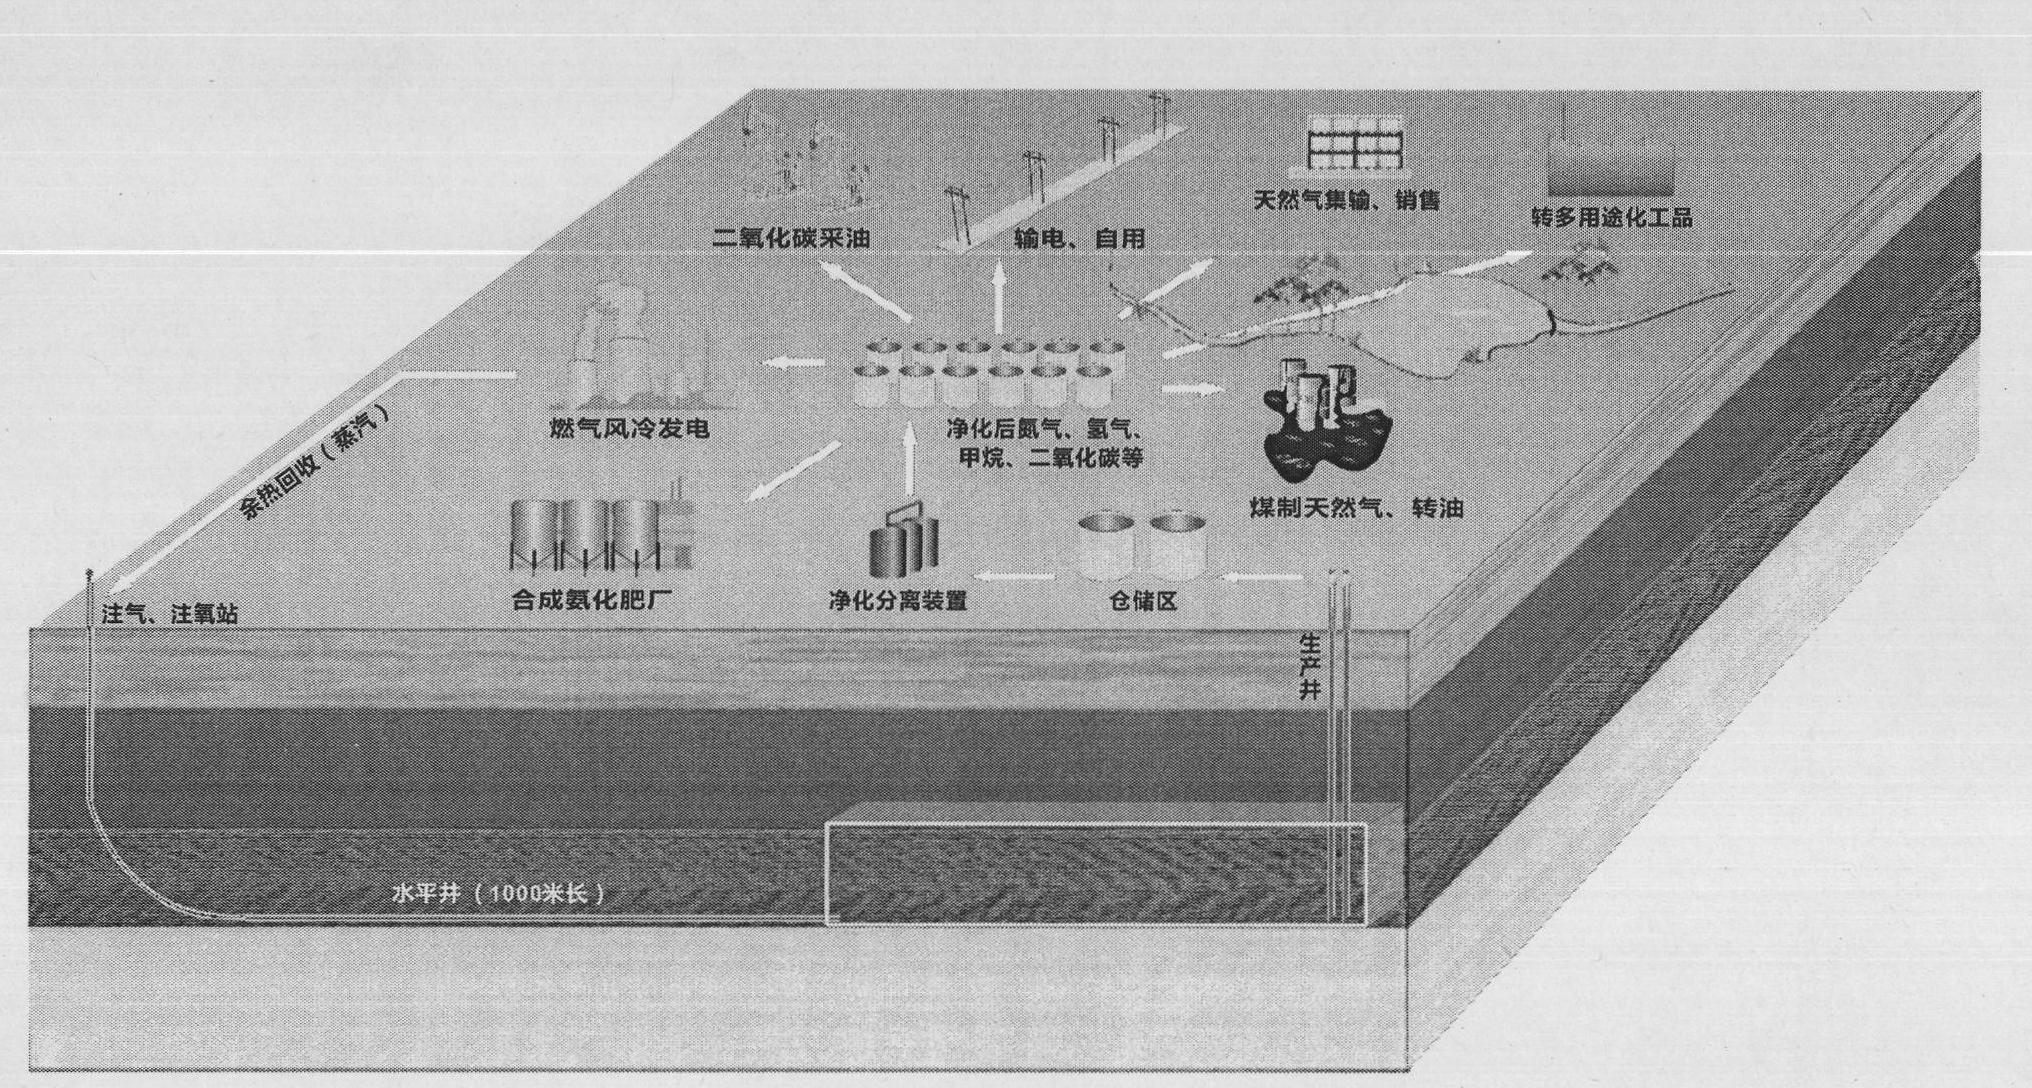 Underground coal gasification poly-generation closed operation technology